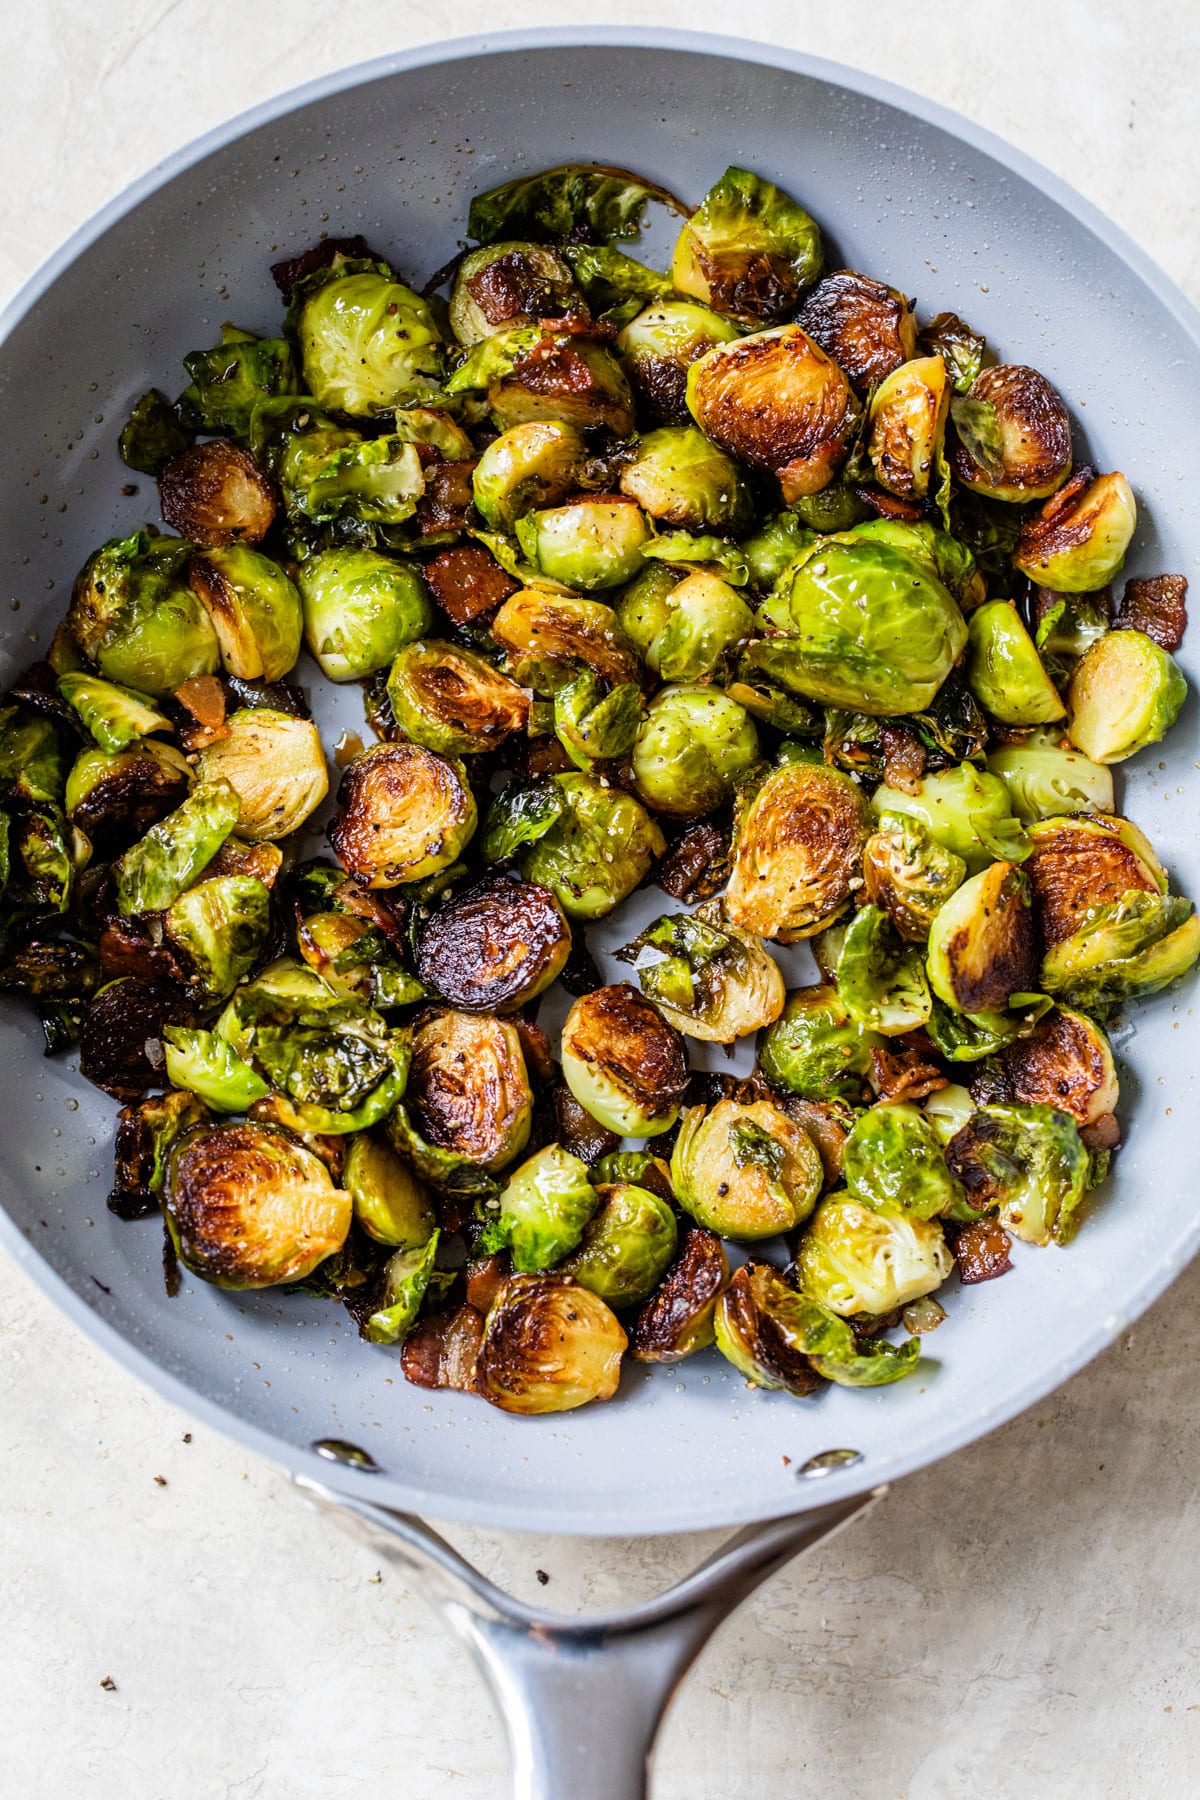 roasted brussels sprouts in a skillet